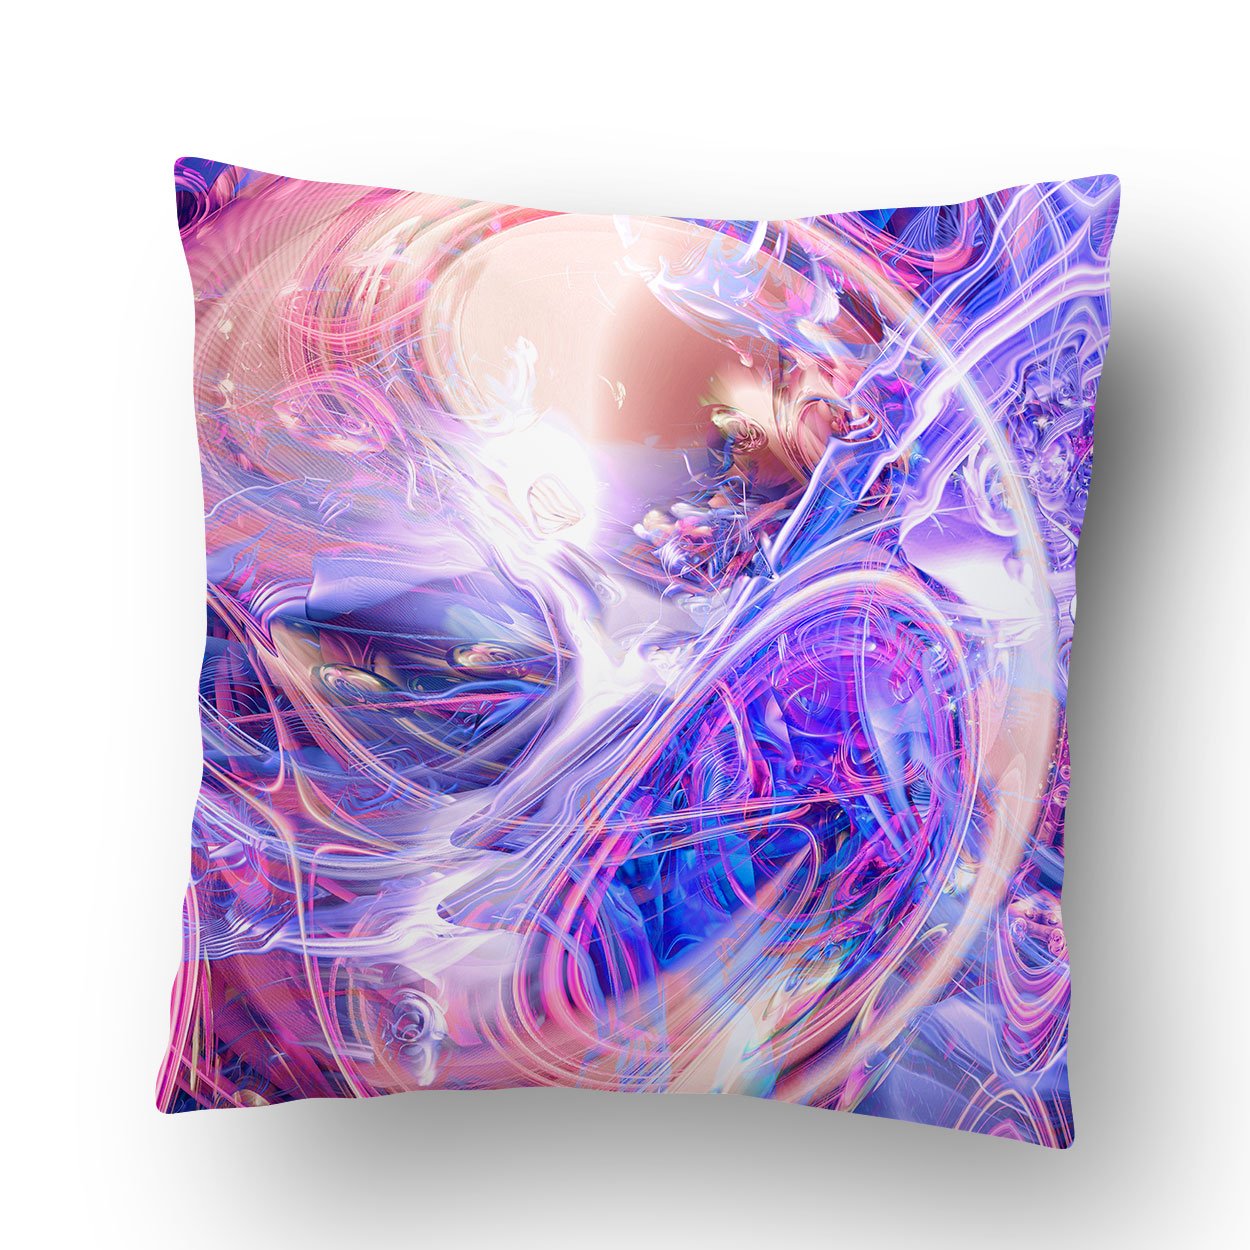 Cosmic Love Throw Pillow Cover